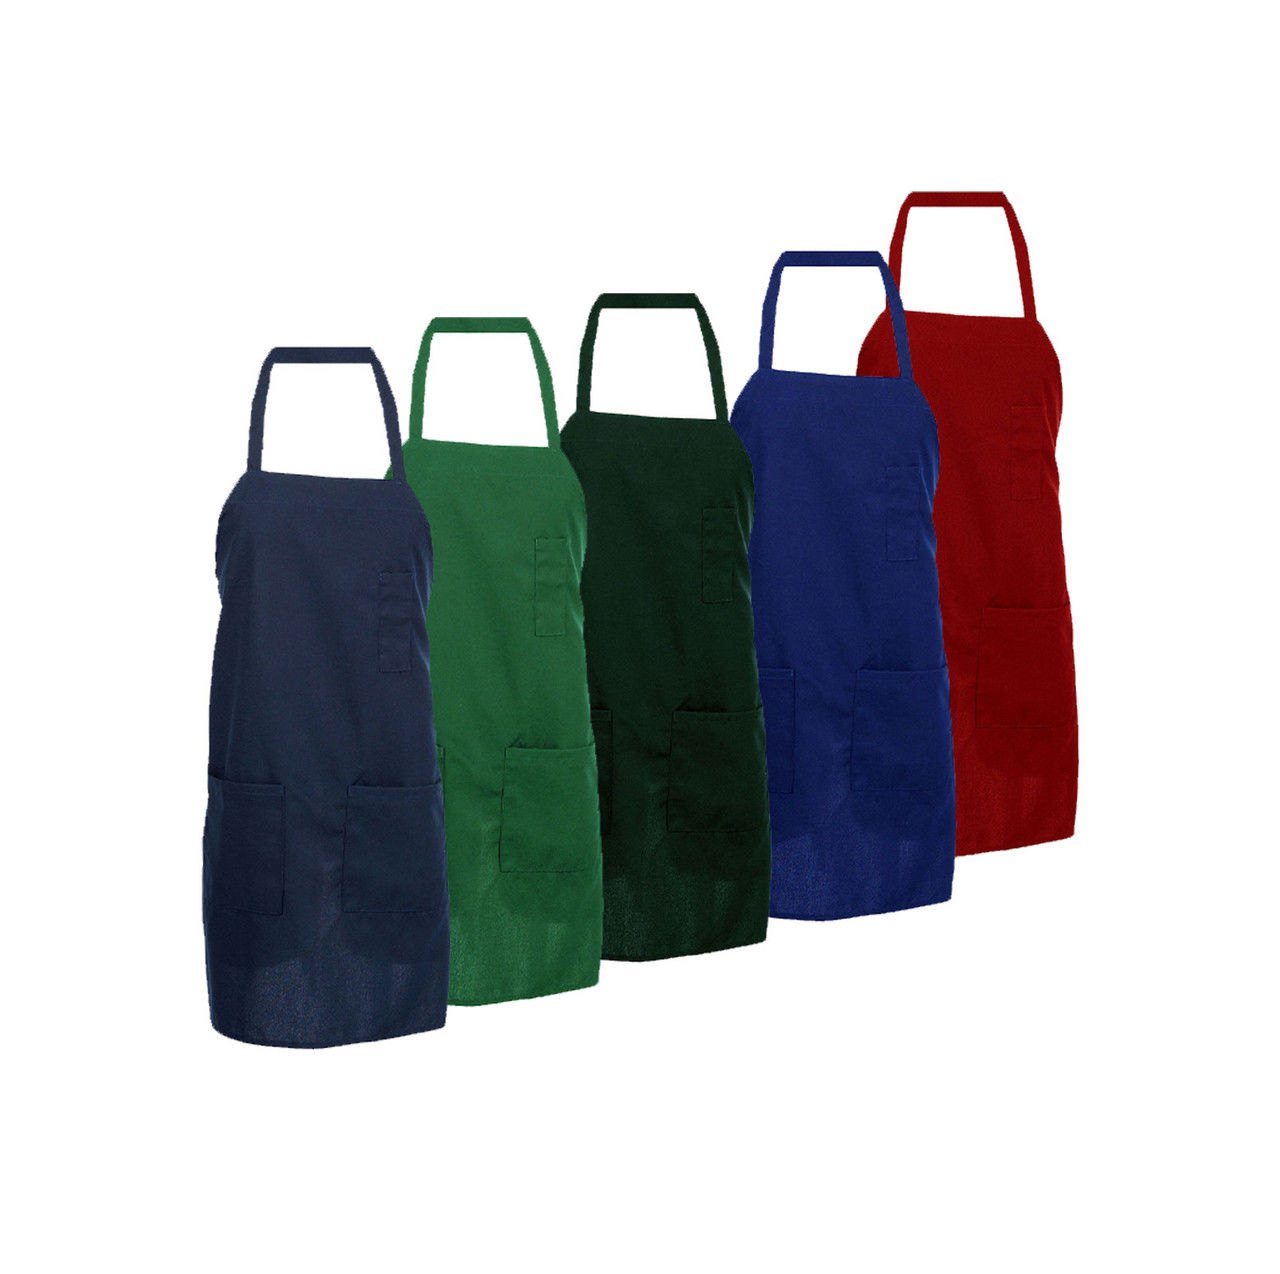 What advantages can you gain from this braid bib 3-pocket apron with tubular ties?